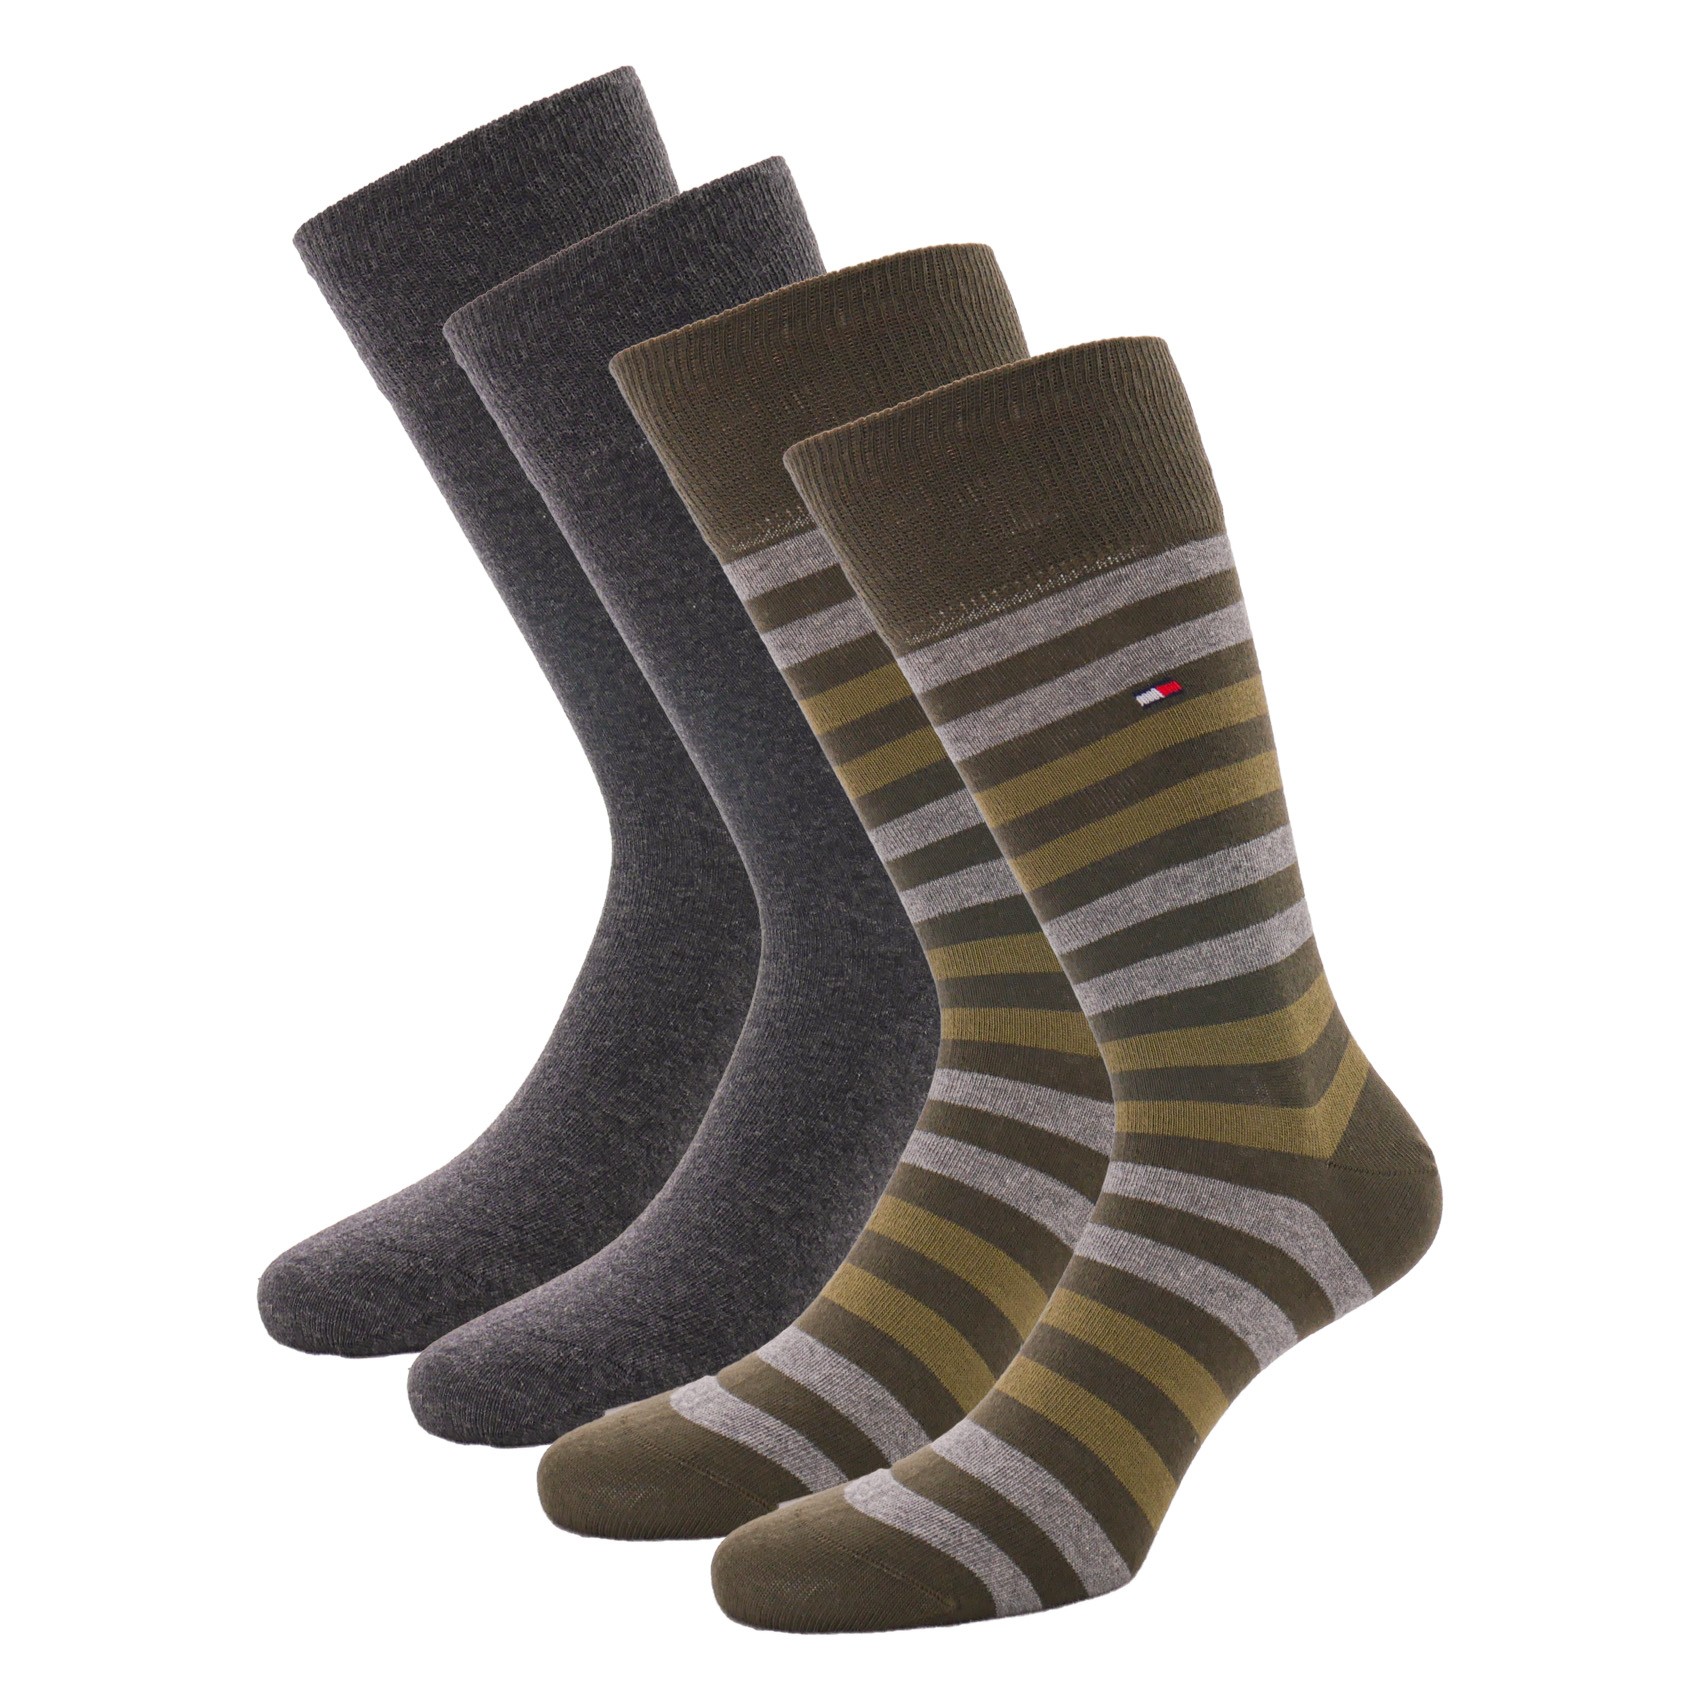 of 2 pairs of socks olive - Tommy Hilfiger : sale of Socks fo...